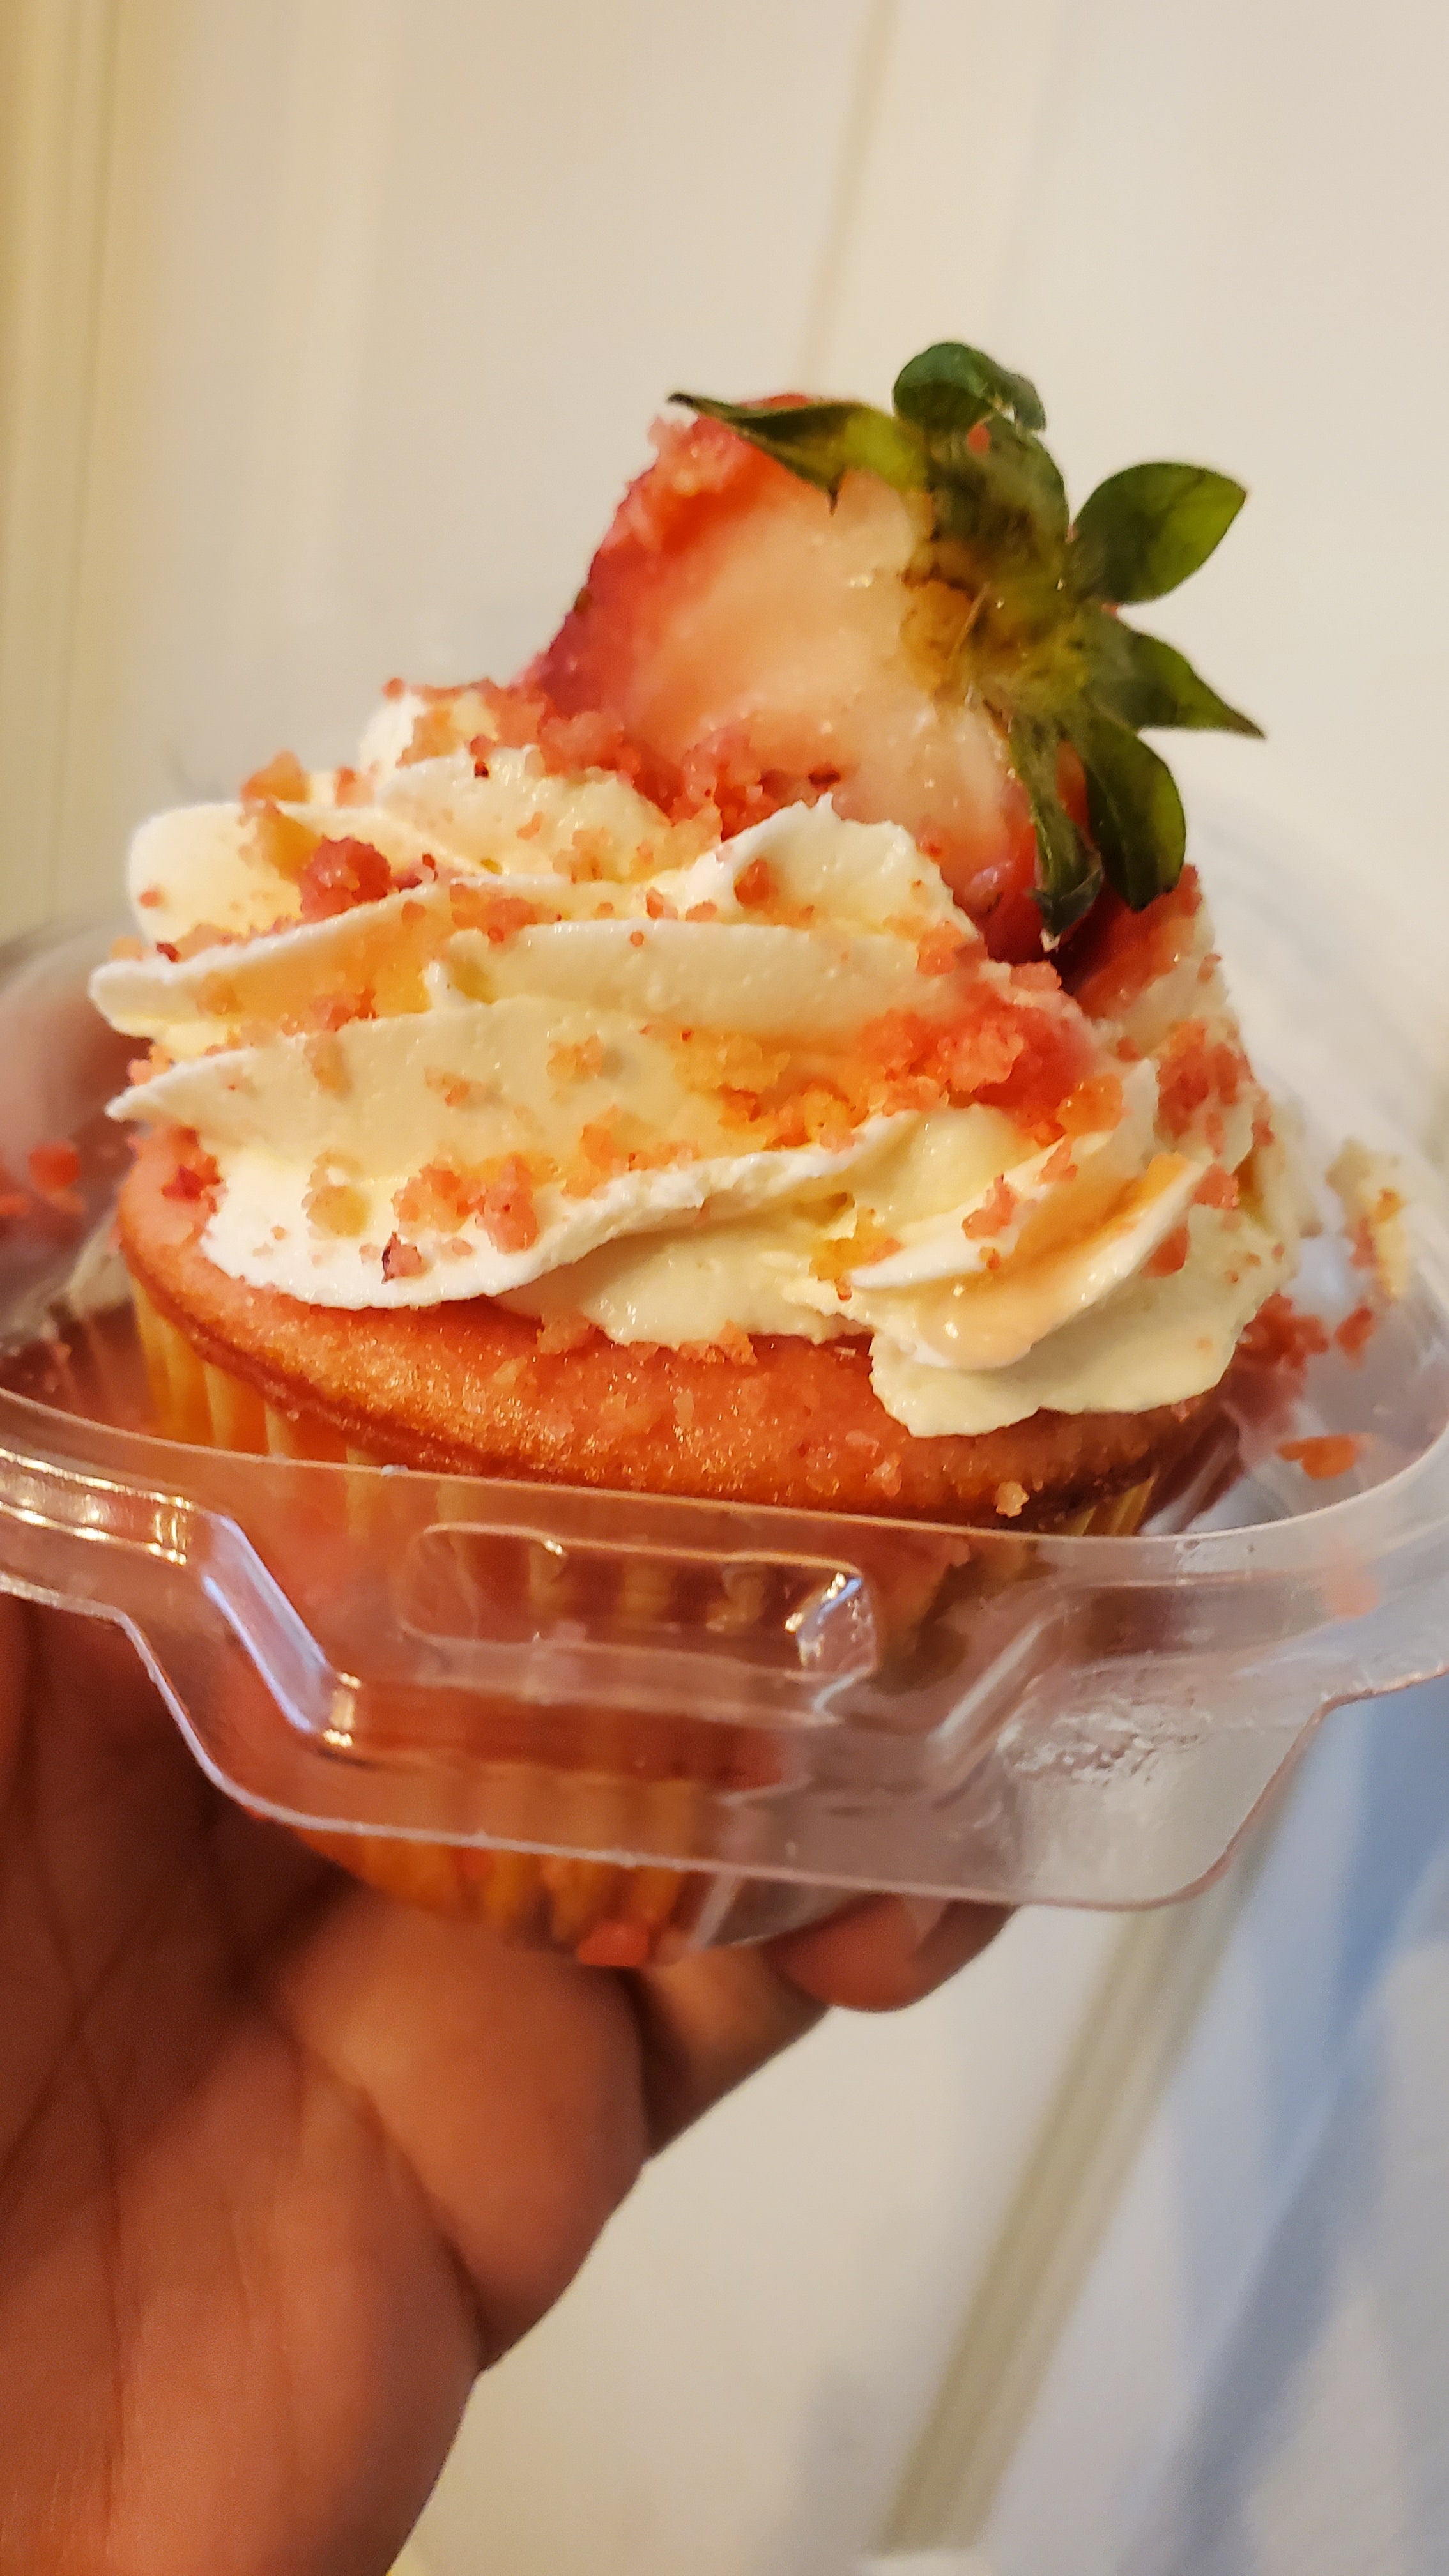 Strawberry Crunch Cupcakes 12ct